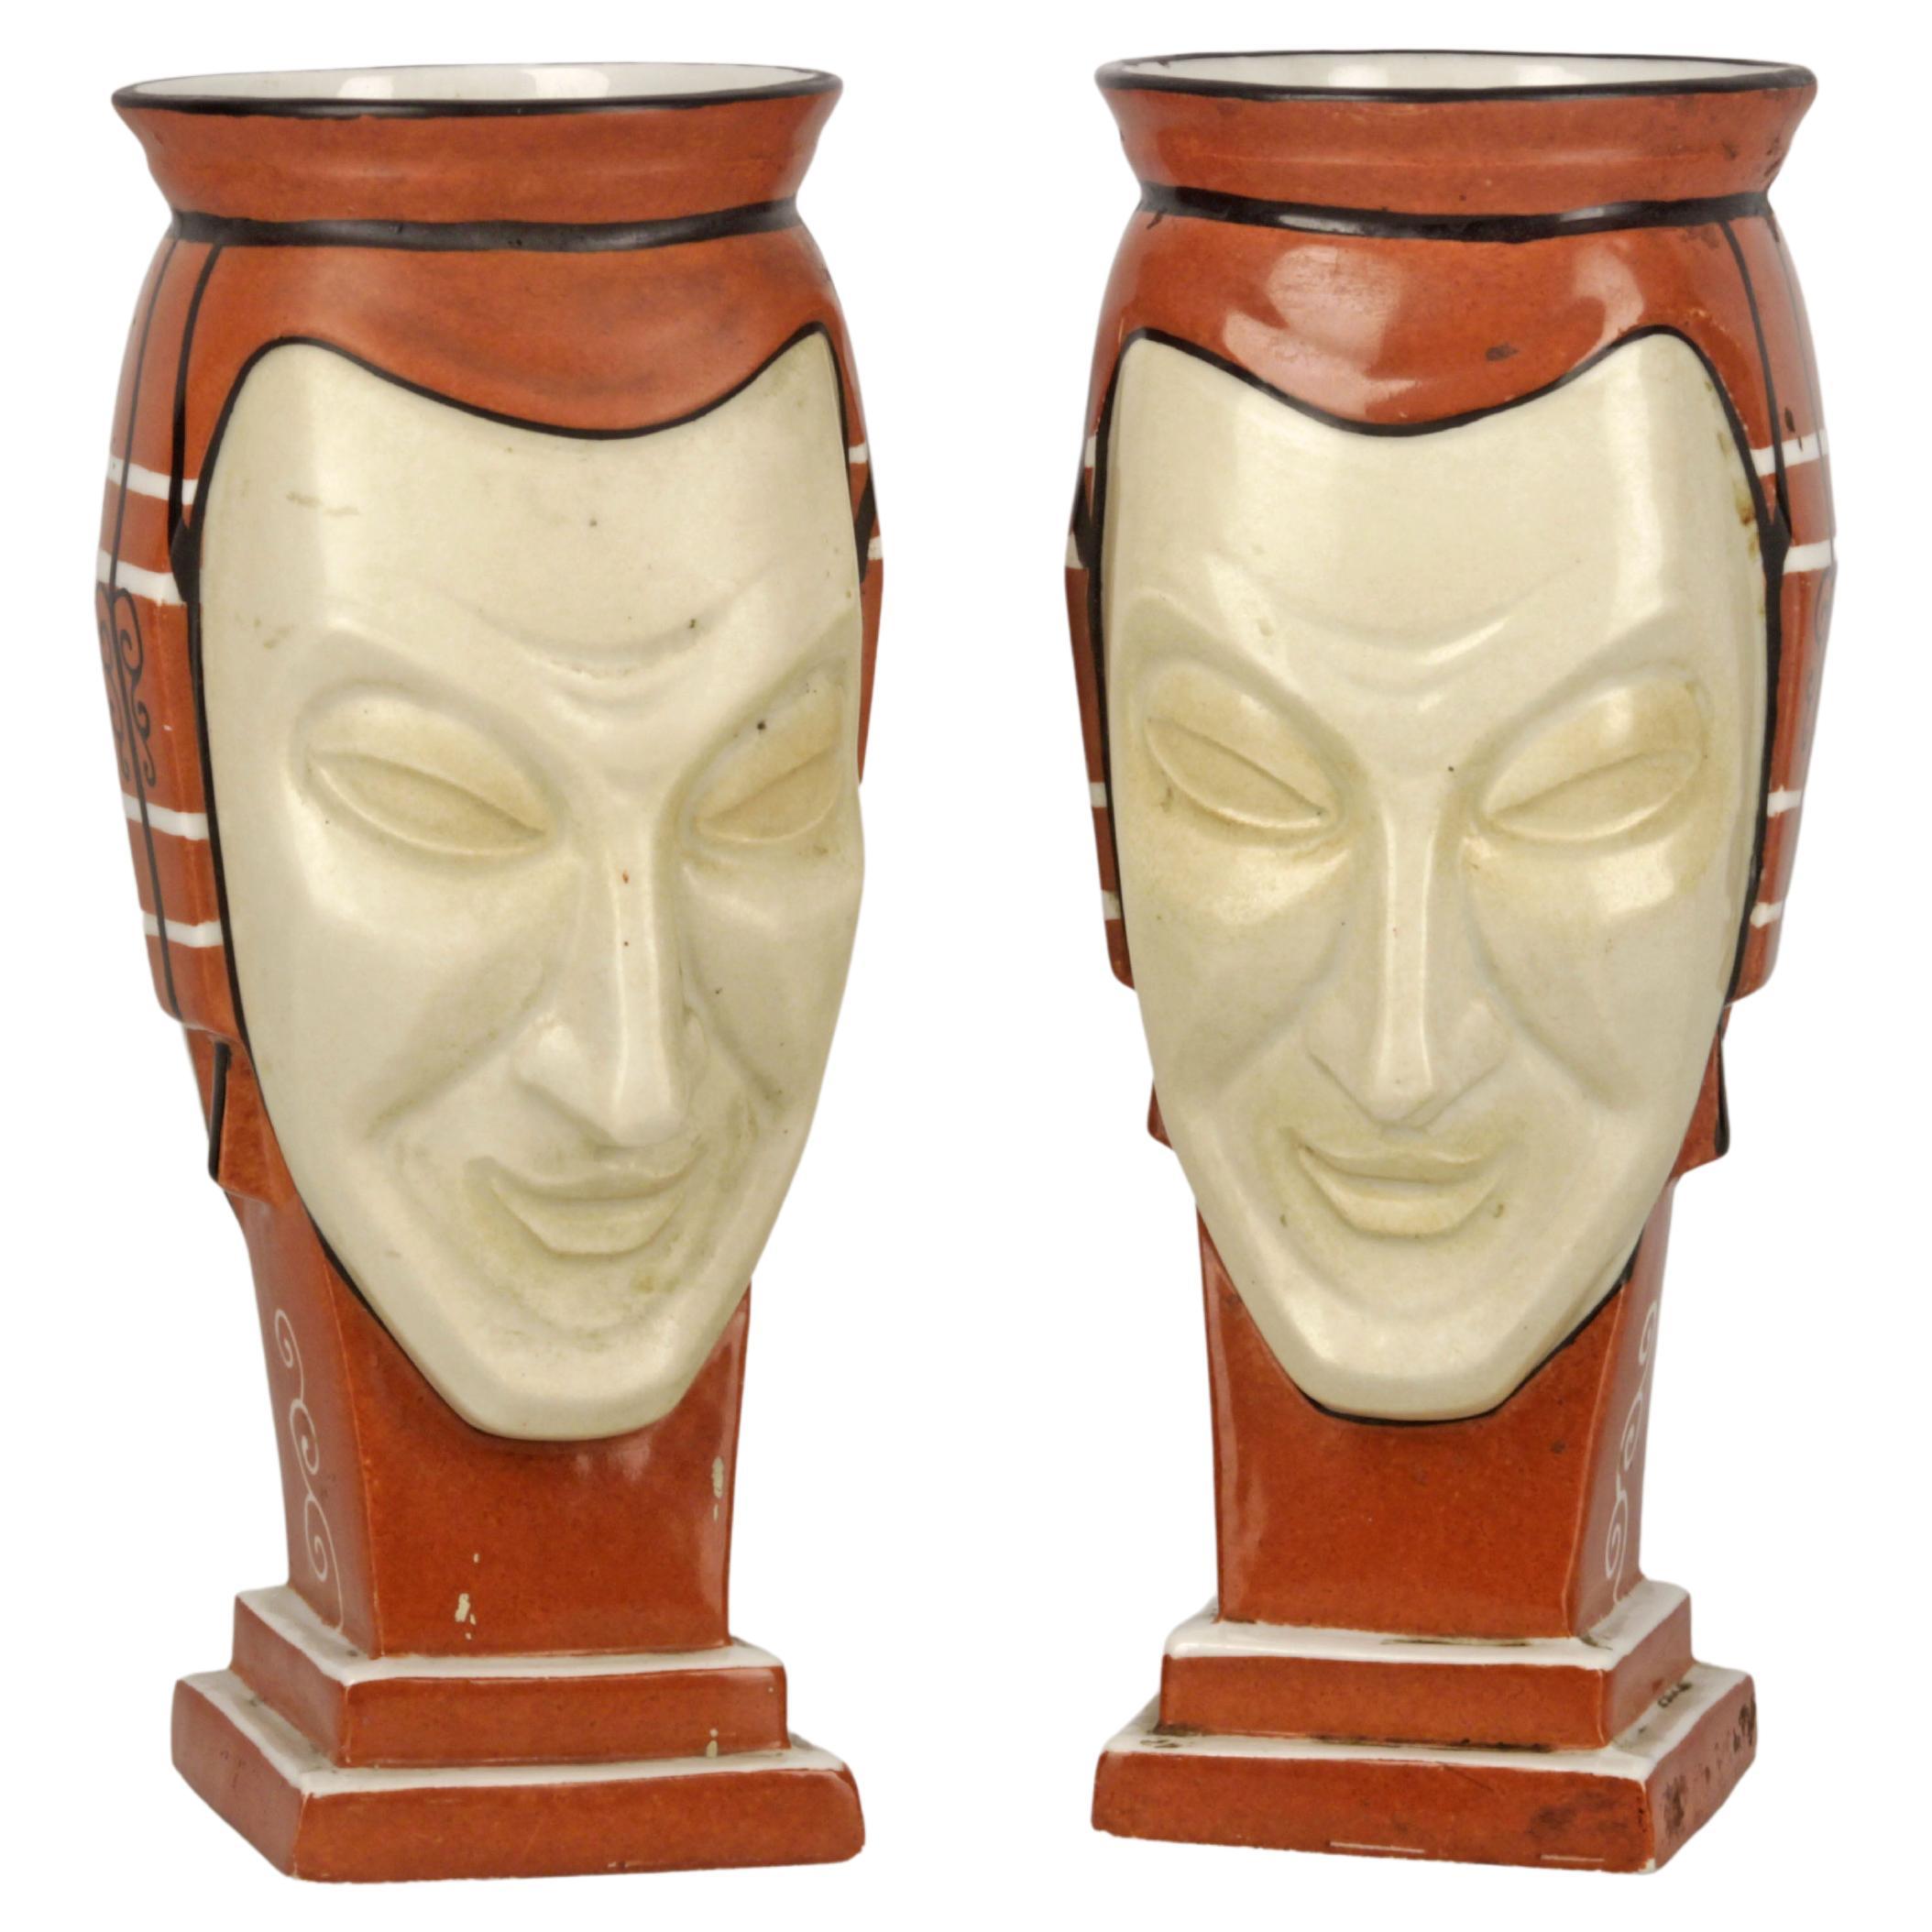 Pair of French Vases Made of Porcelain Representing Two Faces Signed by Aladin For Sale